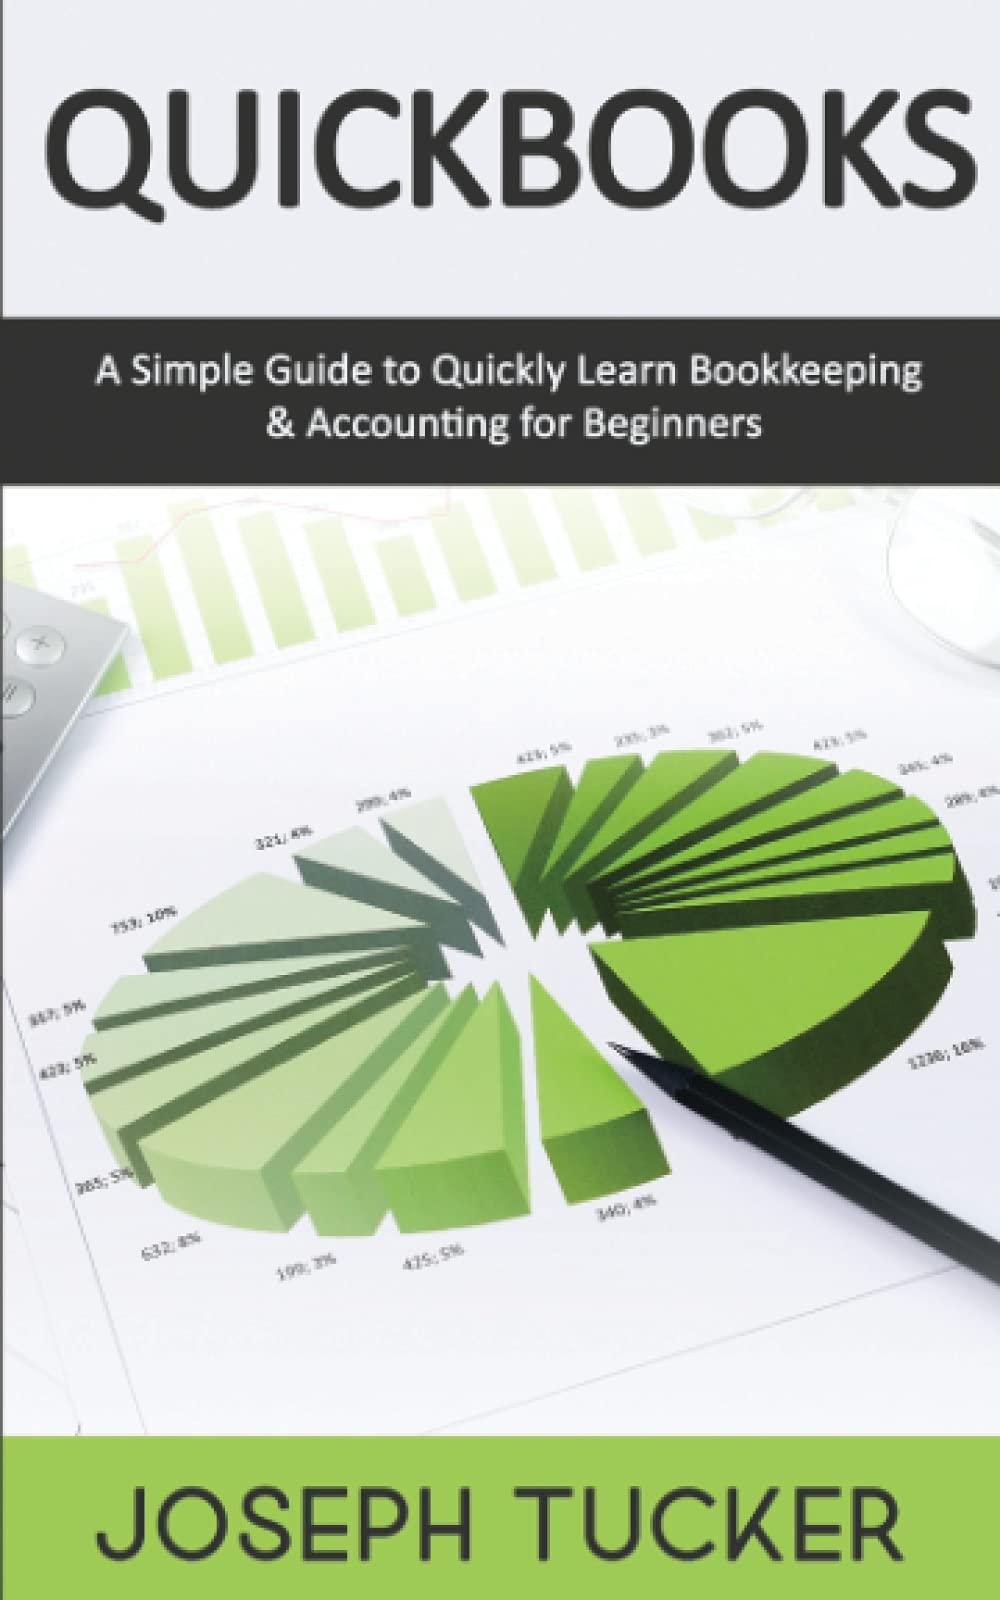 quickbooks a simple guide to quickly learn bookkeeping and accounting for beginners 1st edition joseph tucker